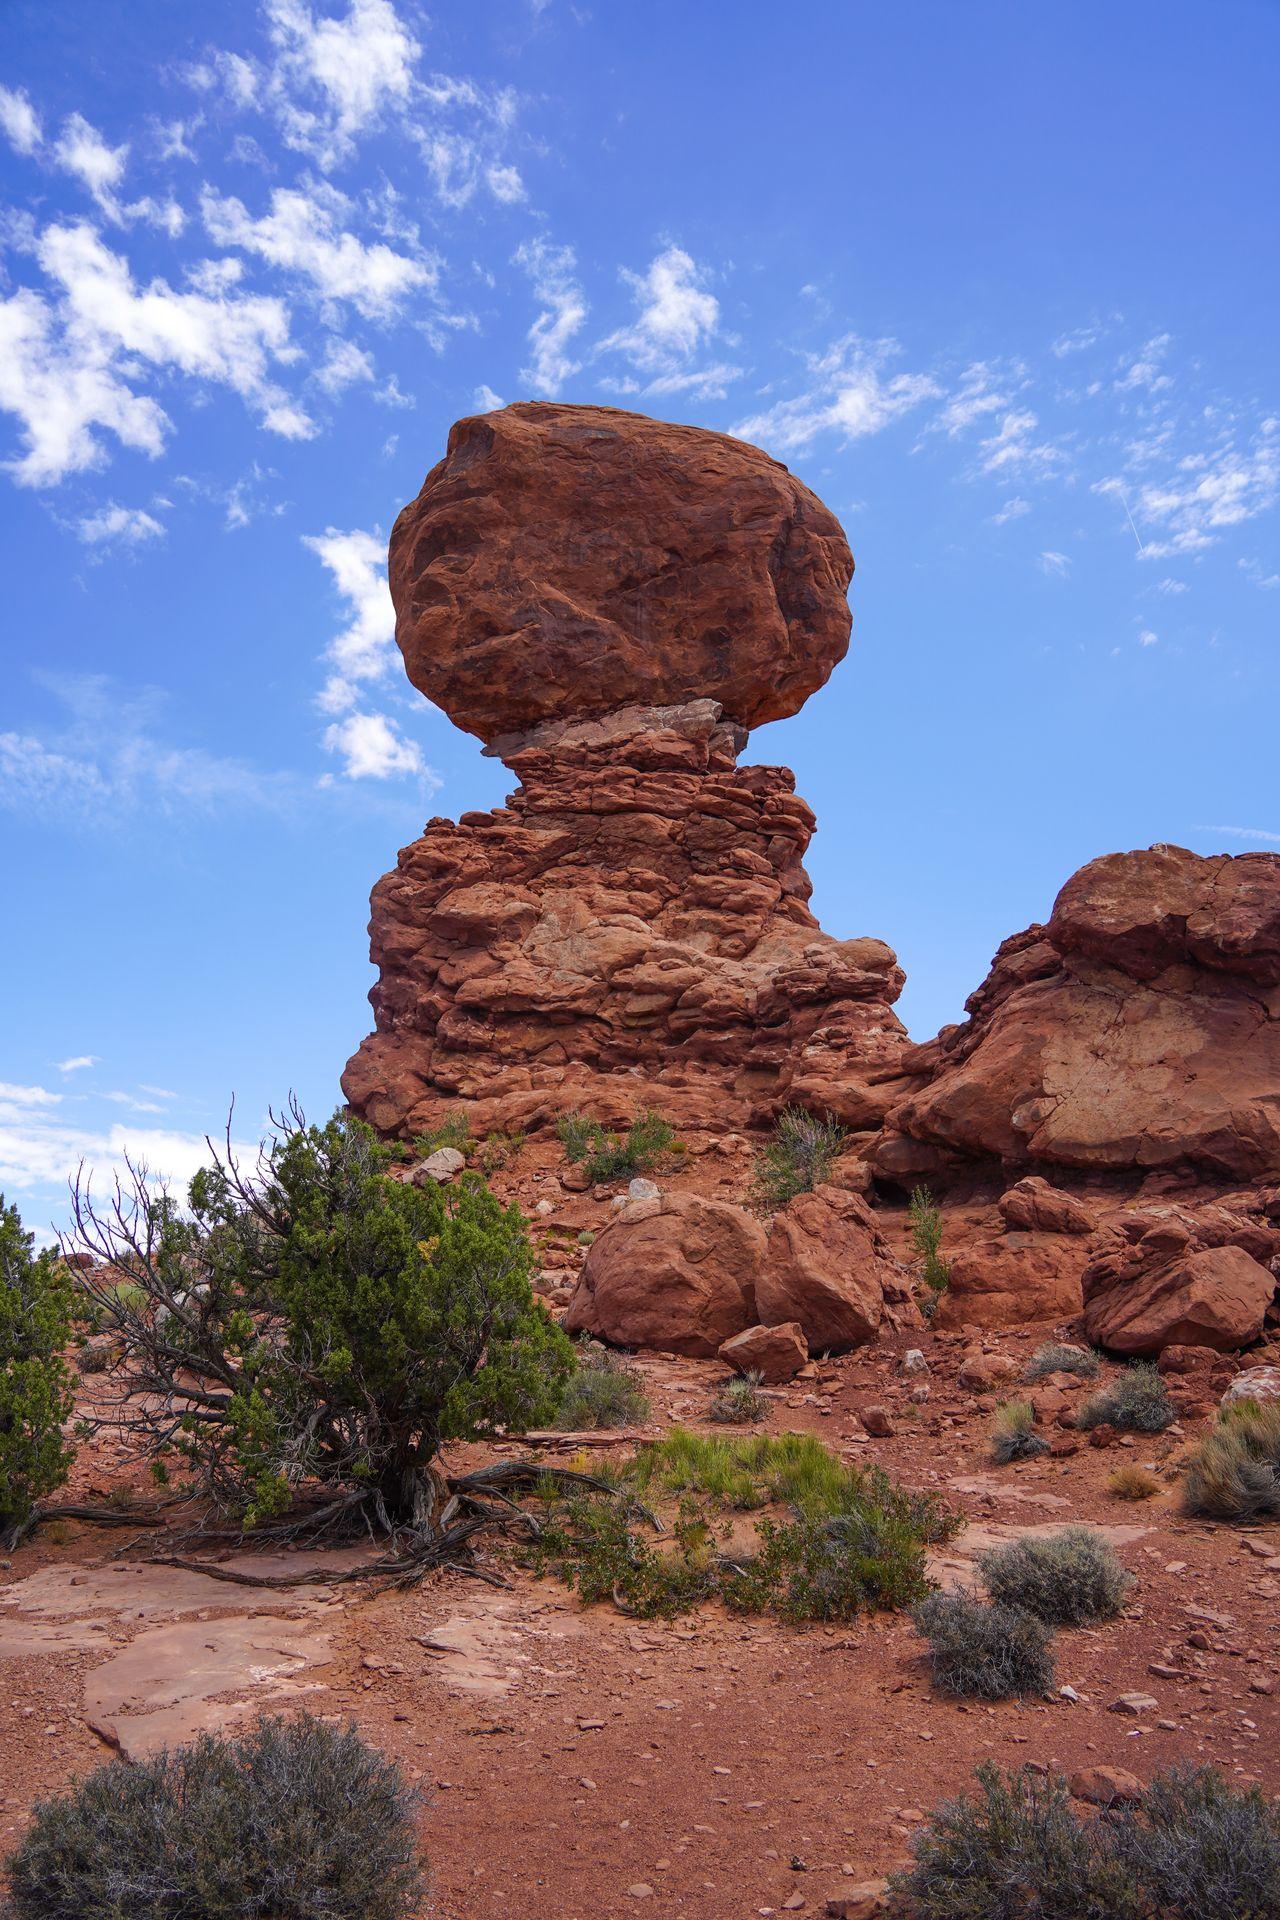 The balanced rock in Arches National Park. There is a giant boulder that looks to balance on a narrow point.